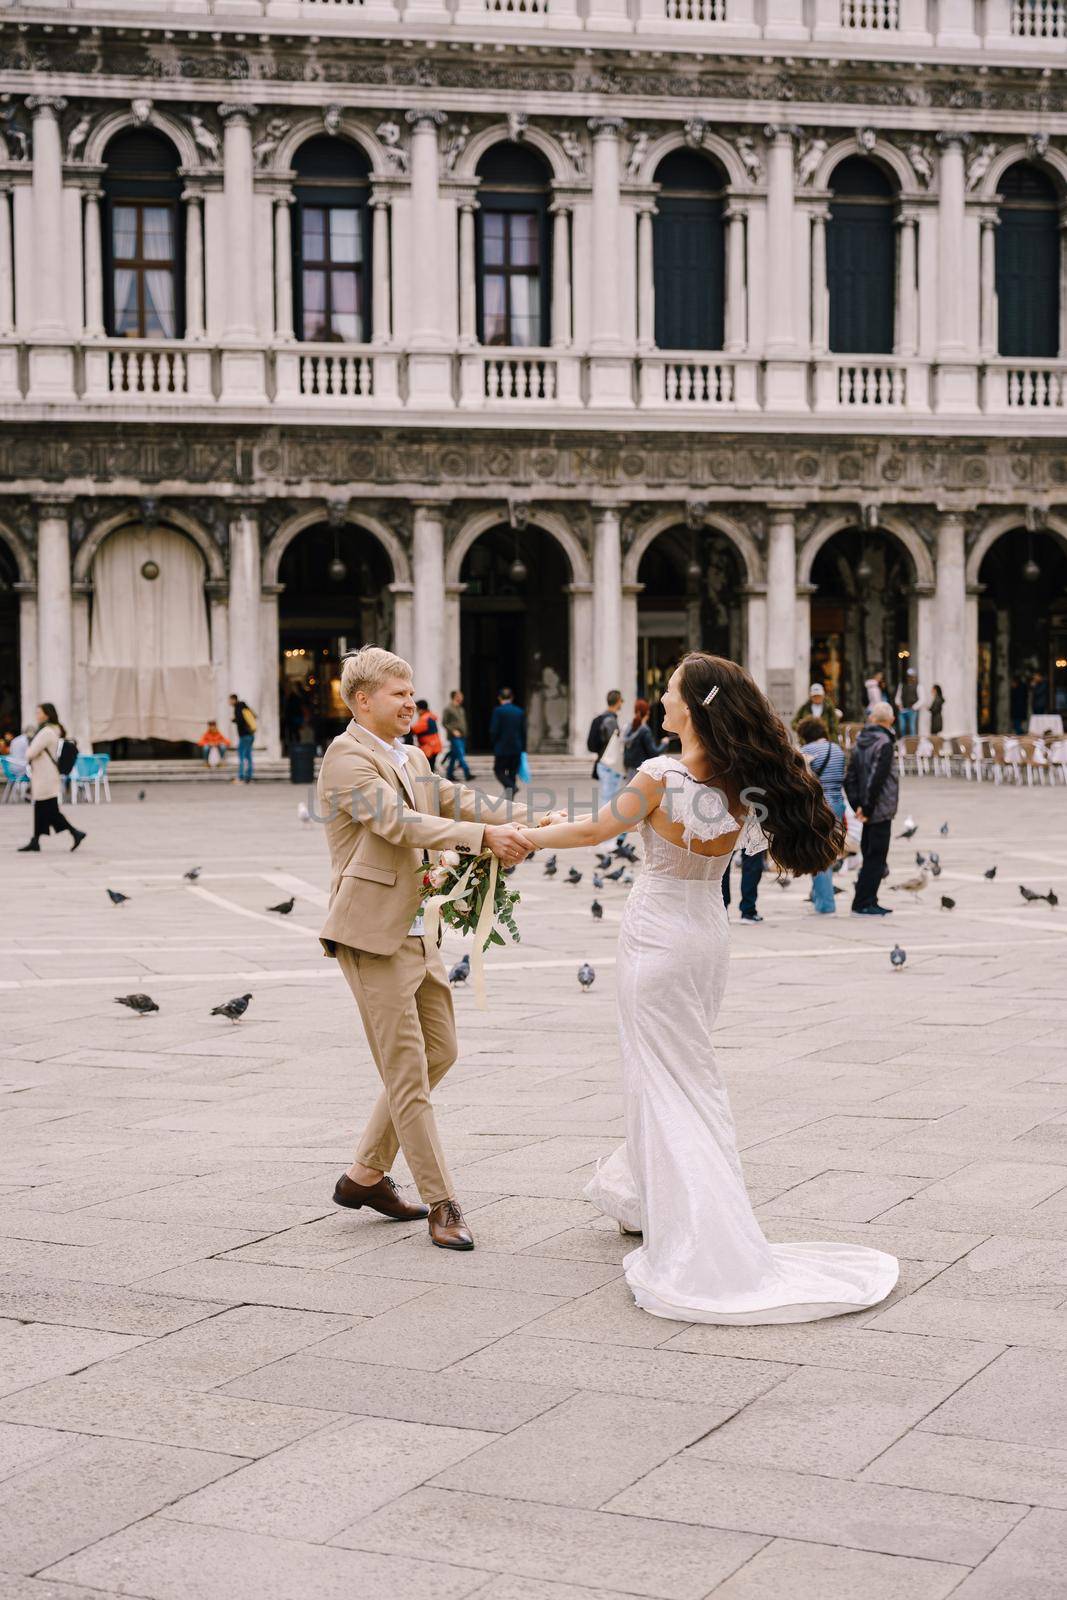 Wedding in Venice, Italy. The bride and groom are dancing among many pigeons in Piazza San Marco, against the backdrop of the National Archaeological Museum Venice, surrounded by a crowd of tourists.